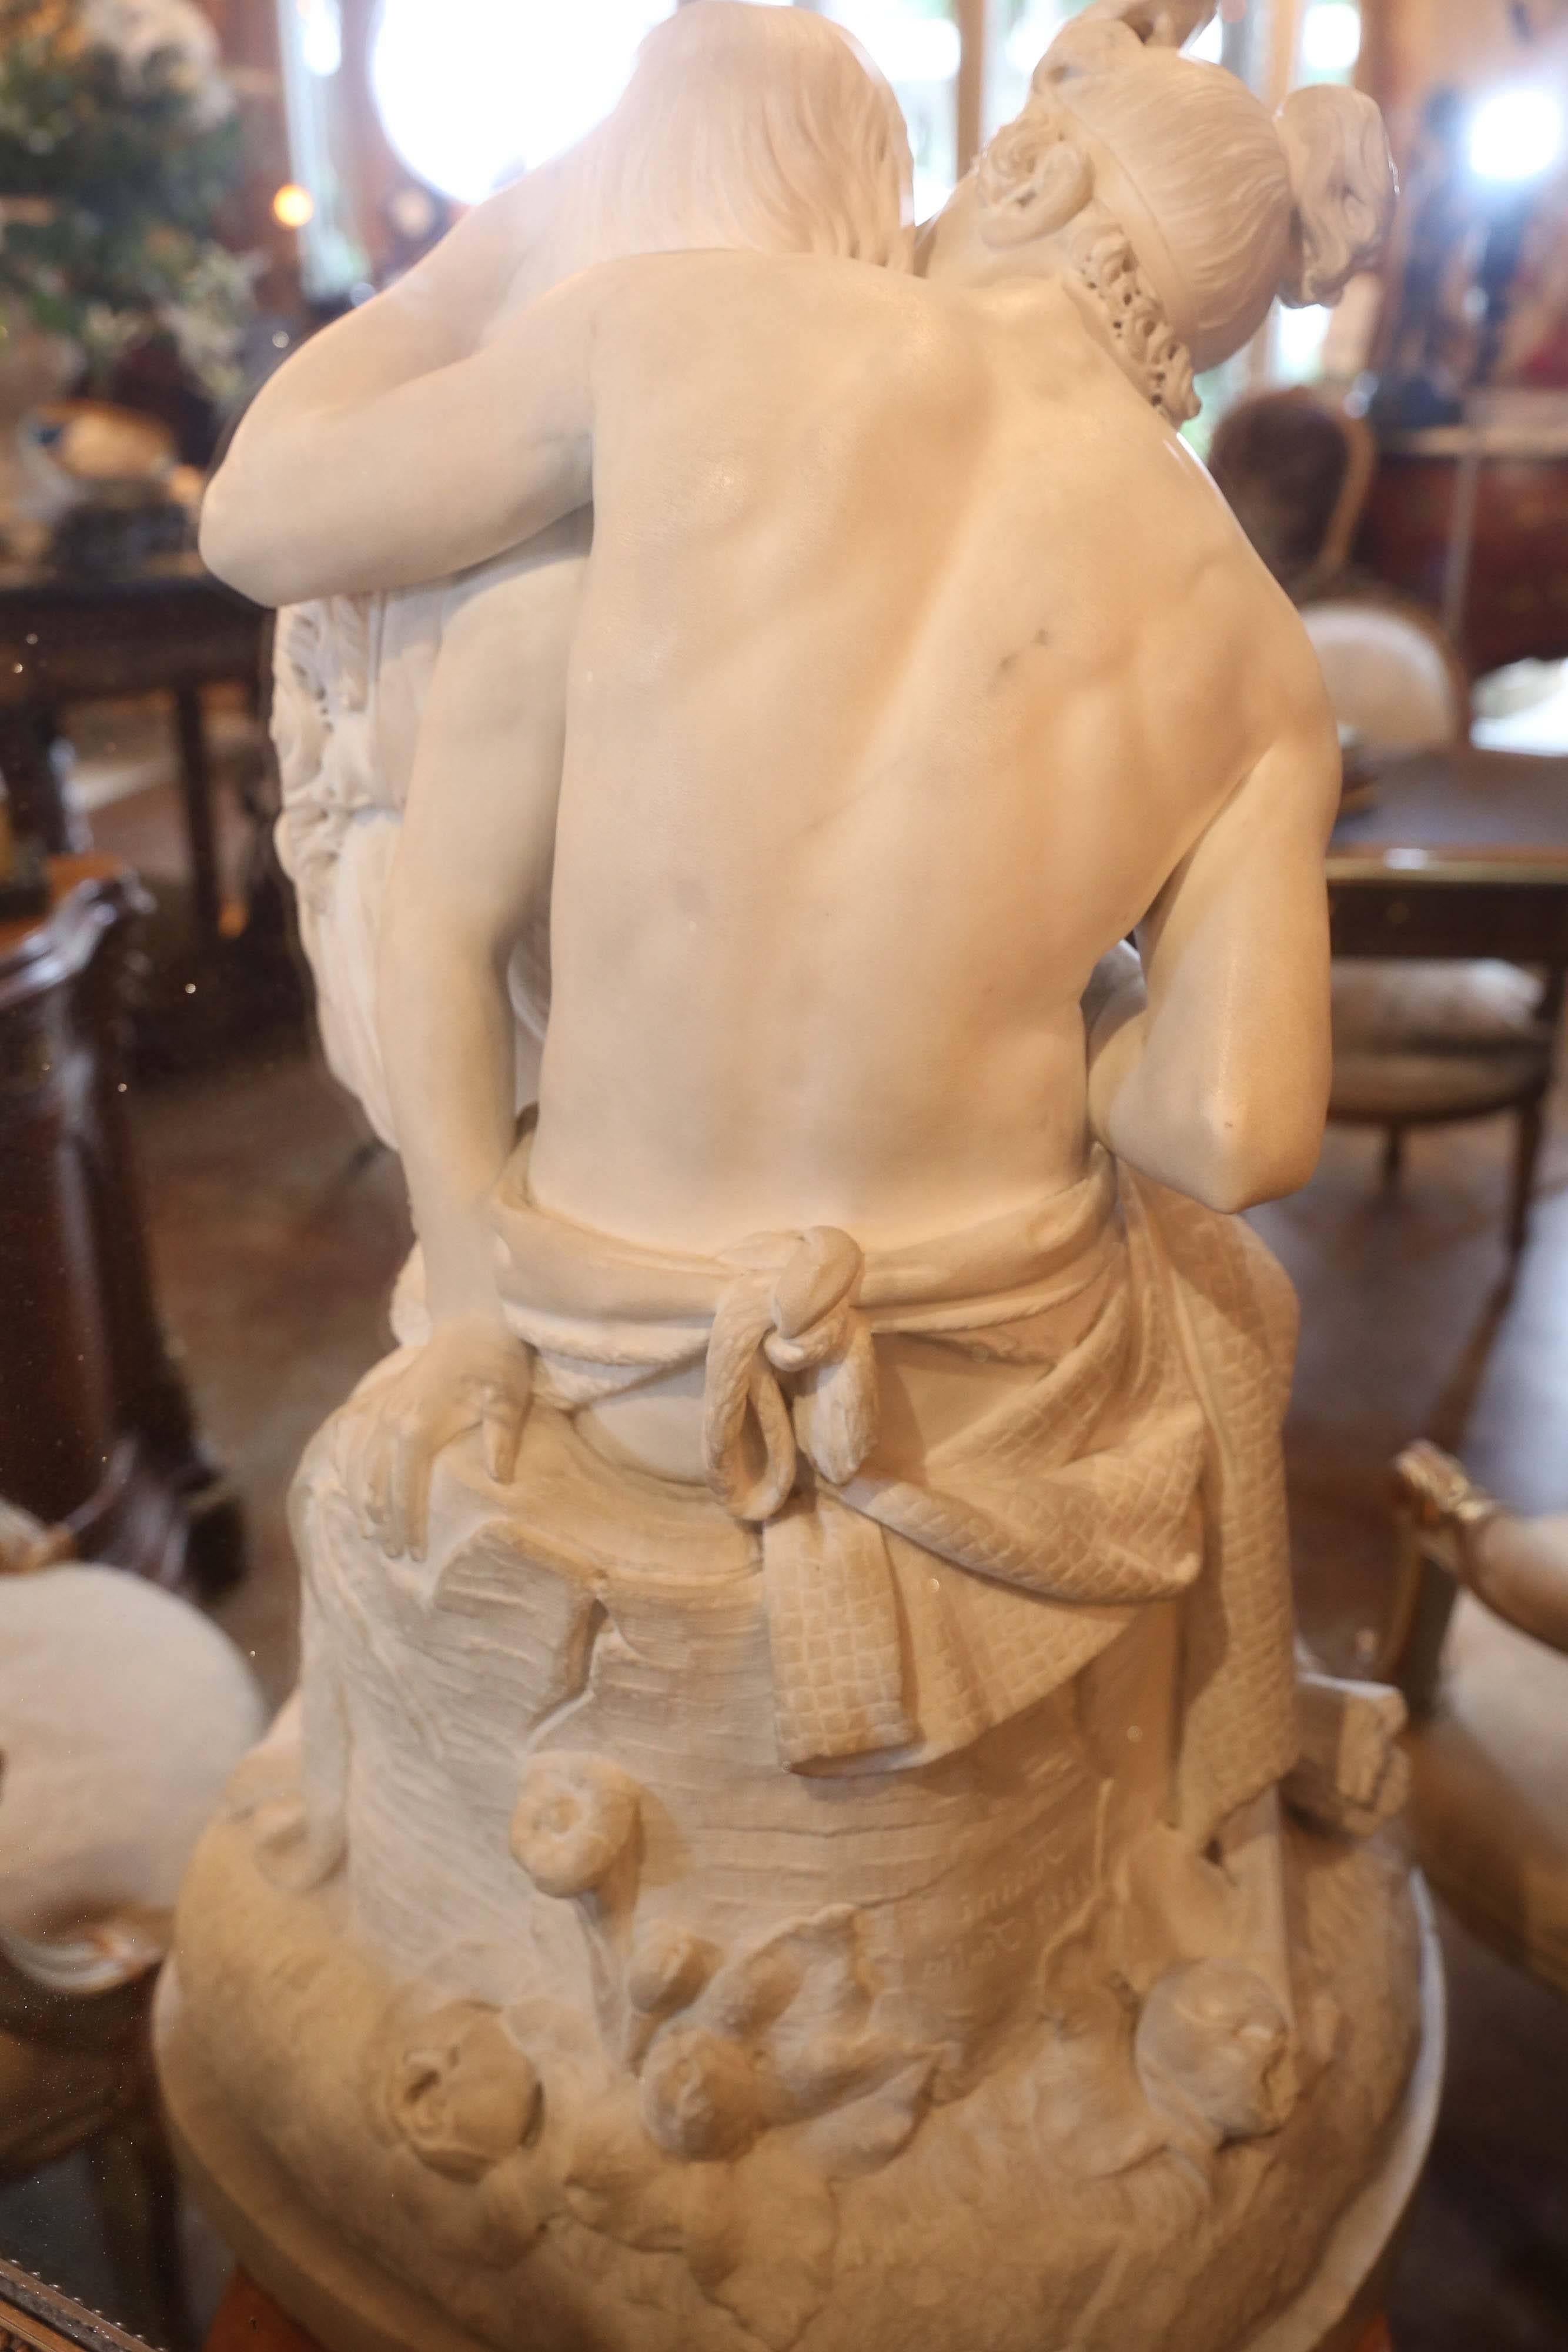 18th Century Large-Scale Marble Sculpture of Two Figures Embracing by the Sculptor Turini